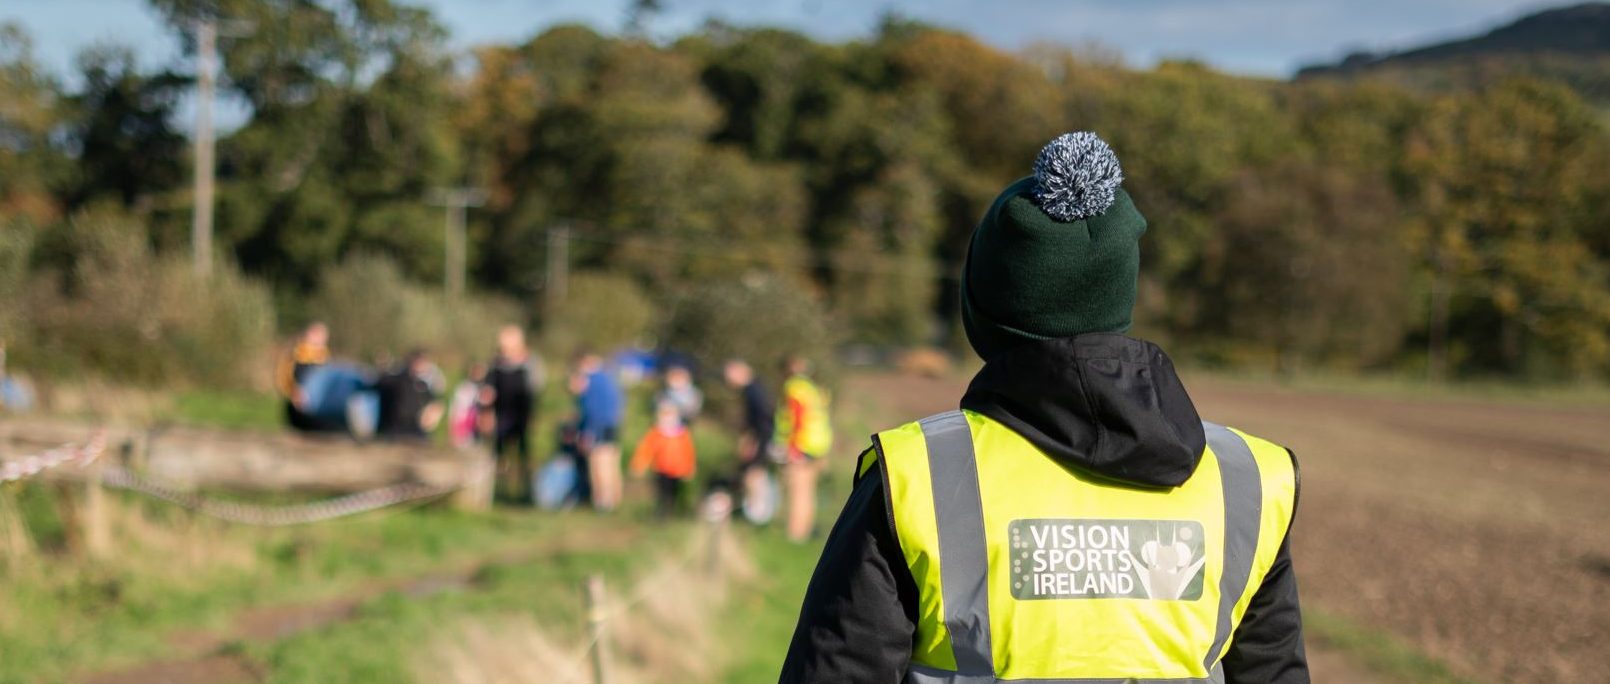 Image of a persons back wearing a vision sports ireland hi vis jacket looking towards a group partaking in activity